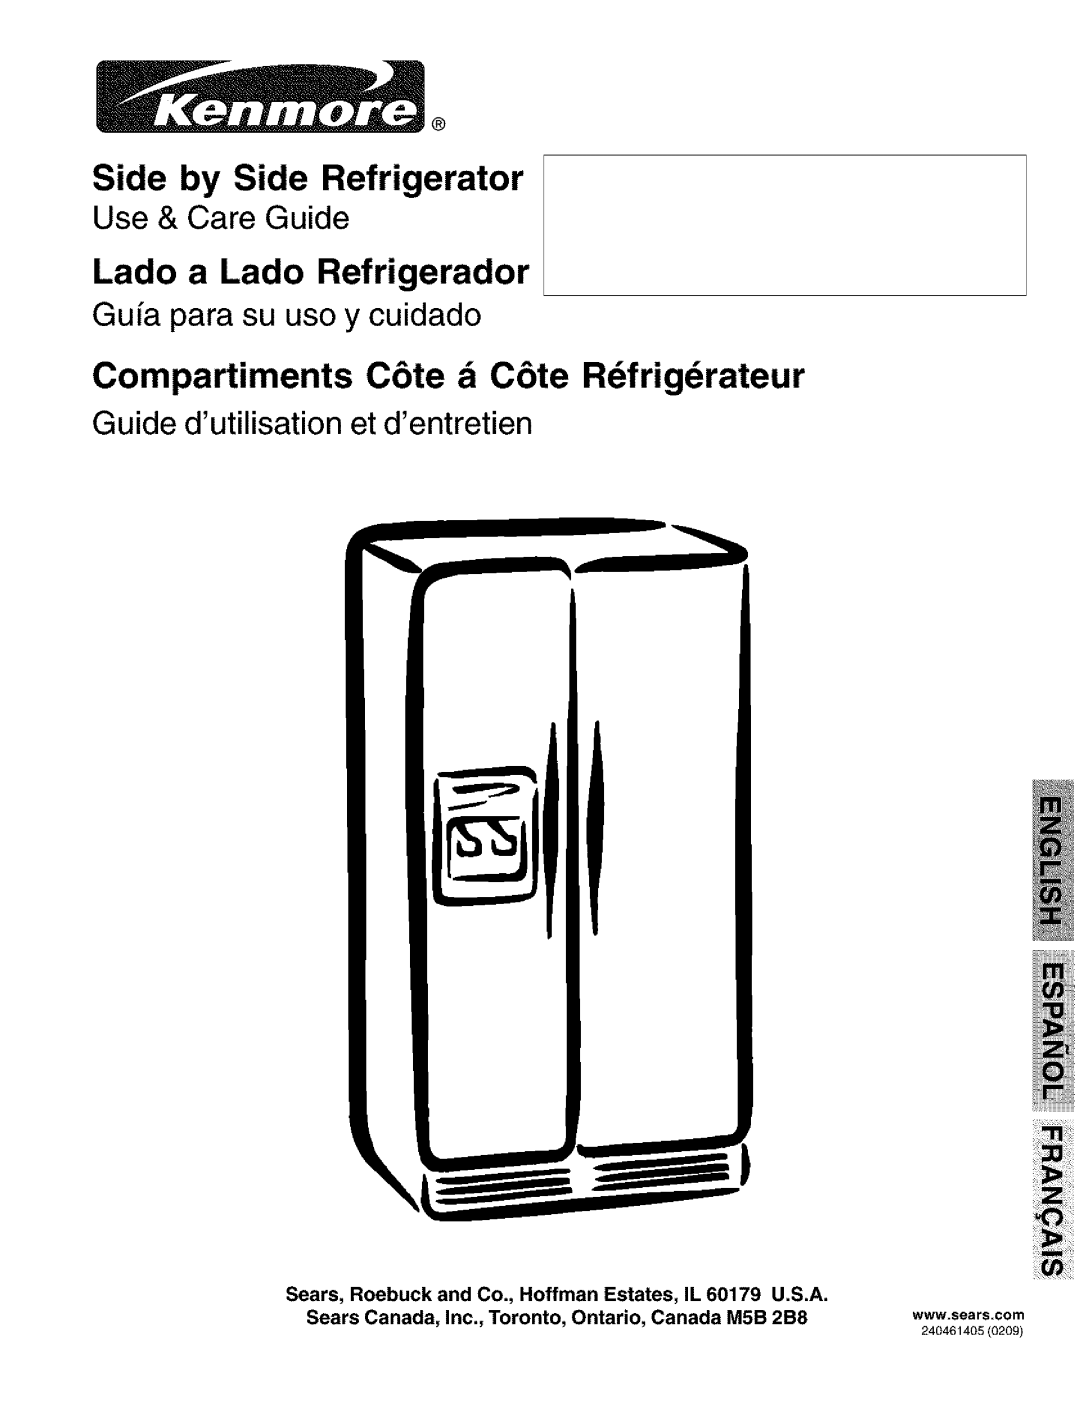 Kenmore 25351699105 manual Sears, Roebuck and Co., Hoffman Estates, IL, U.S.A, Side by Side Refrigerator, Use & Care Guide 